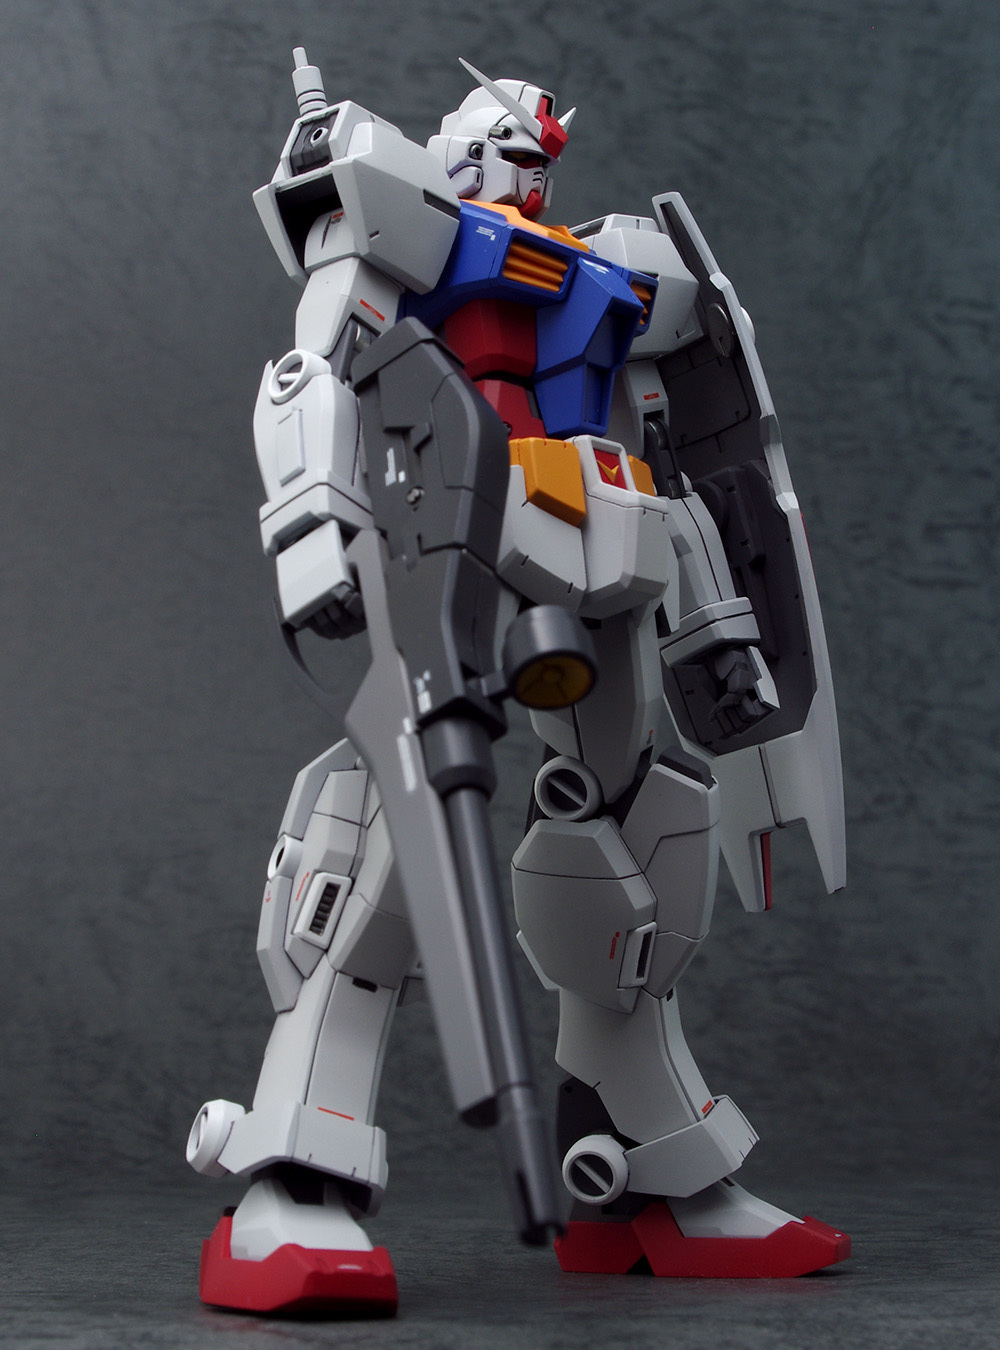 Hgbf Gm Gm改造ガンダム完成 3modesign Factory